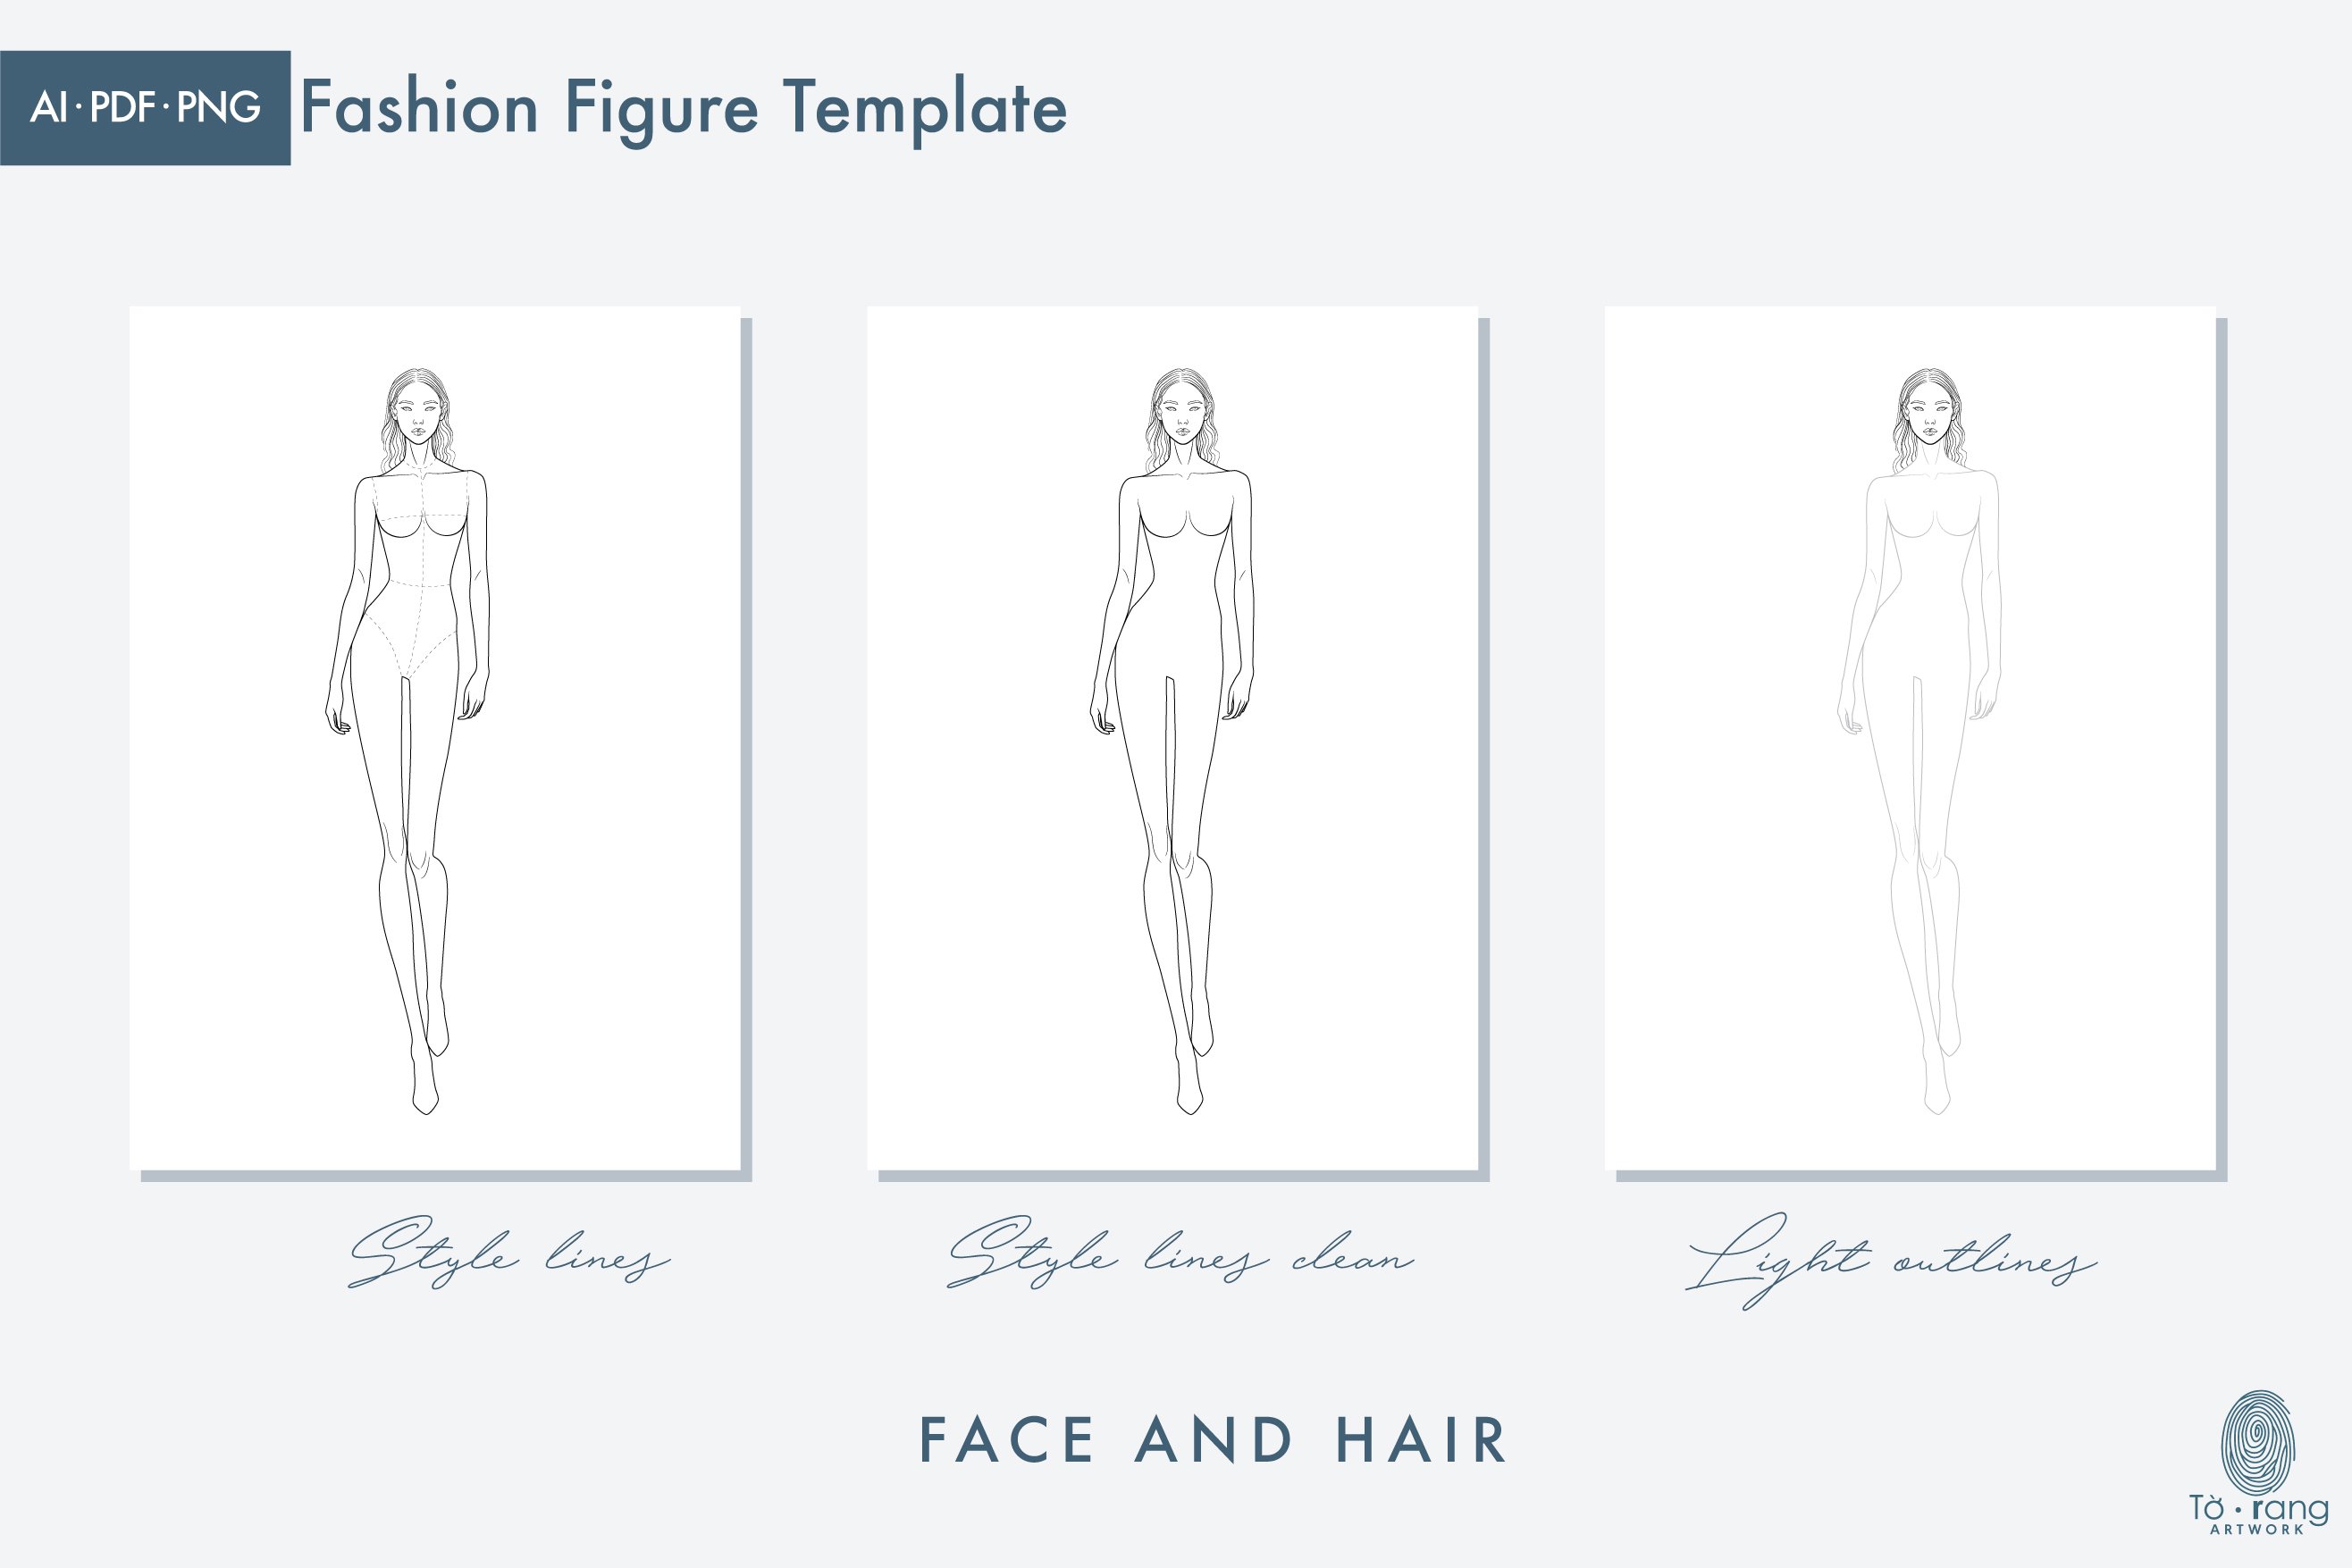 How to draw a fashion figure for a beginner